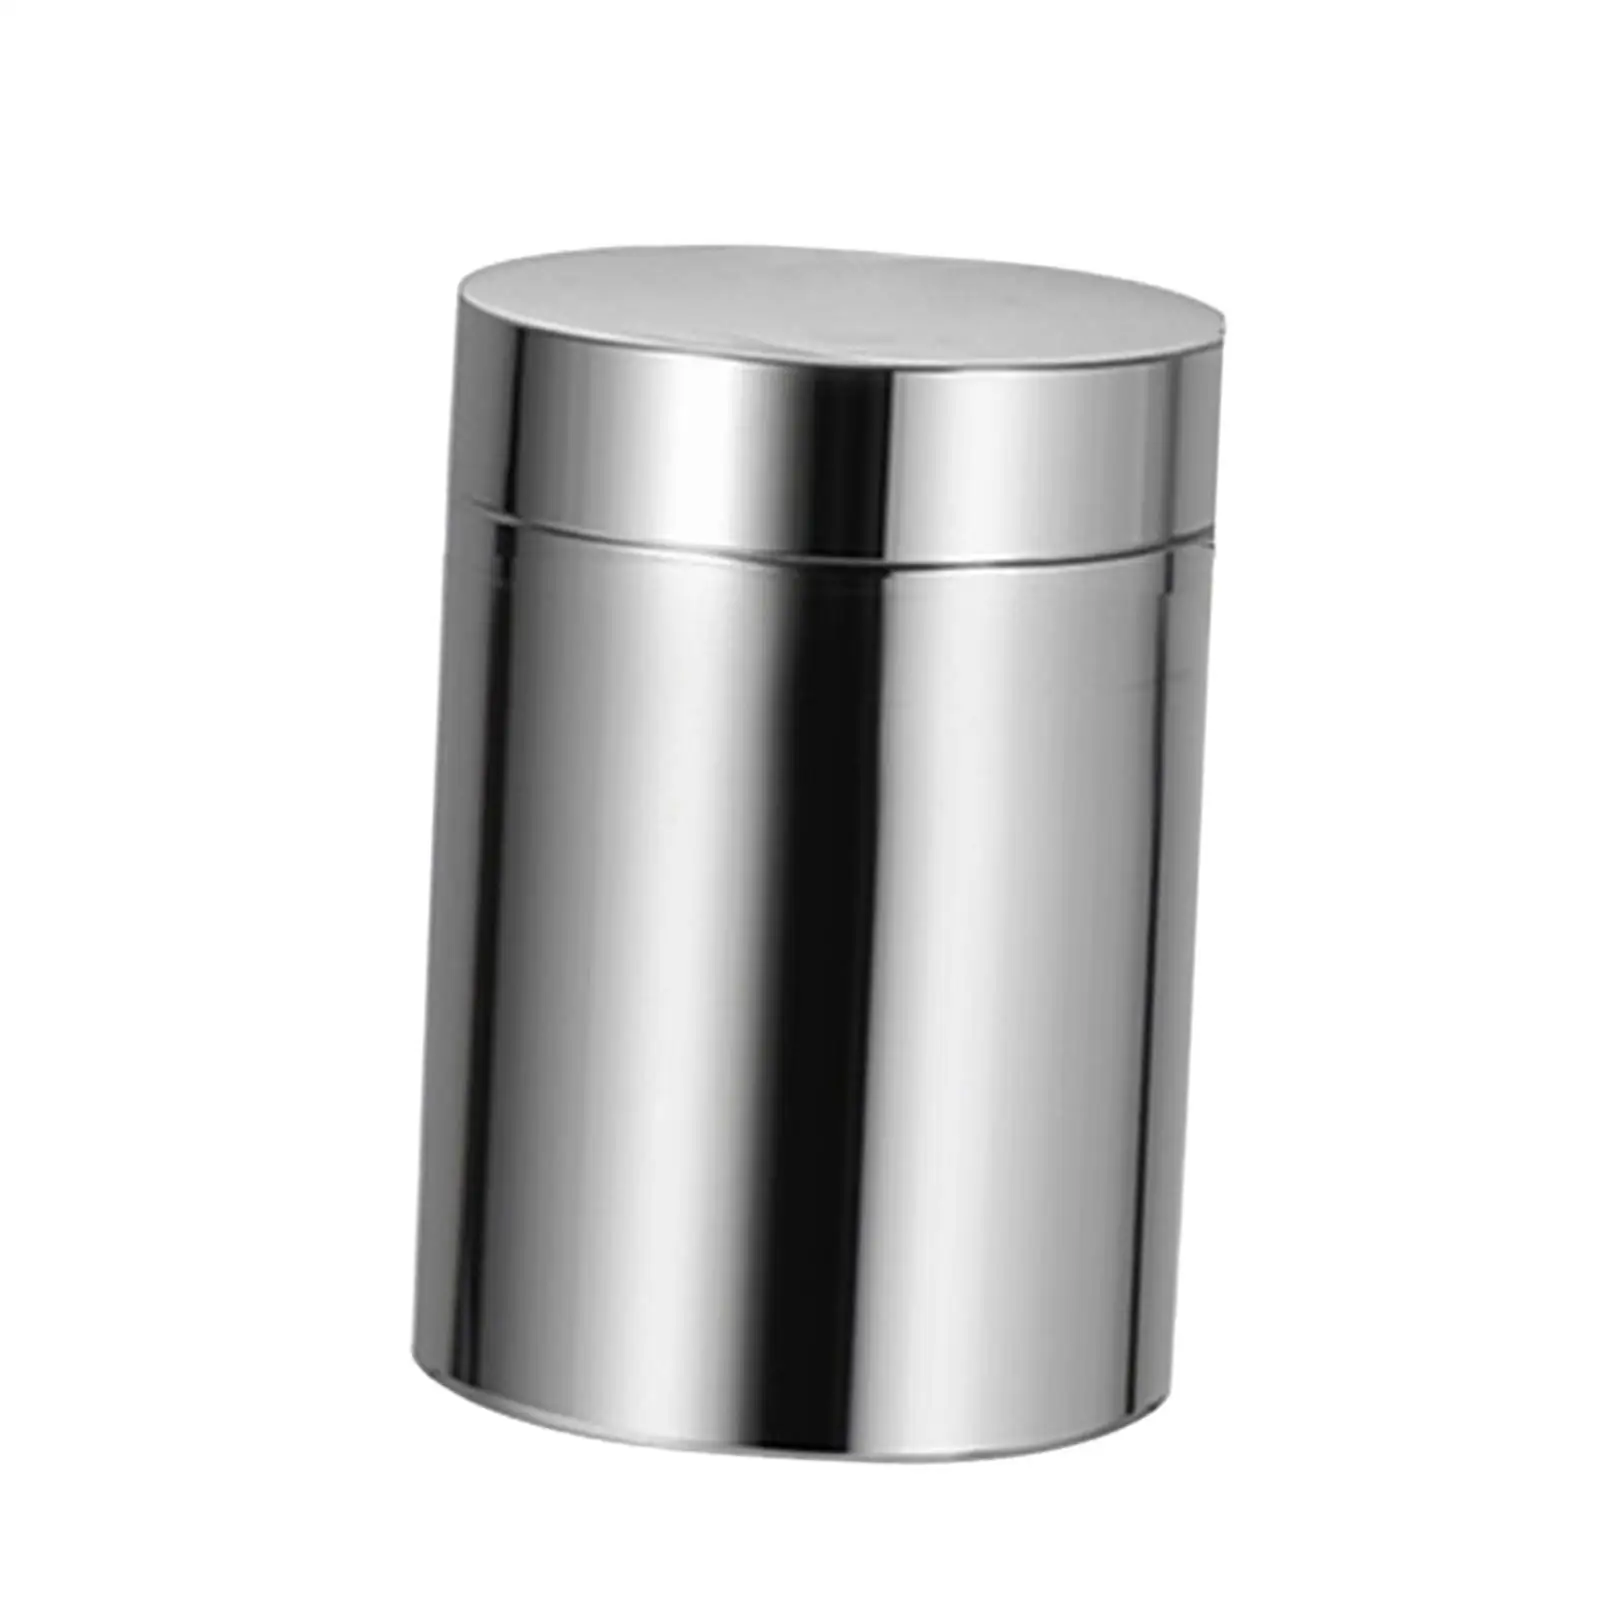 Tea Tins Canister with Airtight Lids, Mini Tea Storage Containers Round Tin Can Box for Storage Tea Coffee Loose Leaf